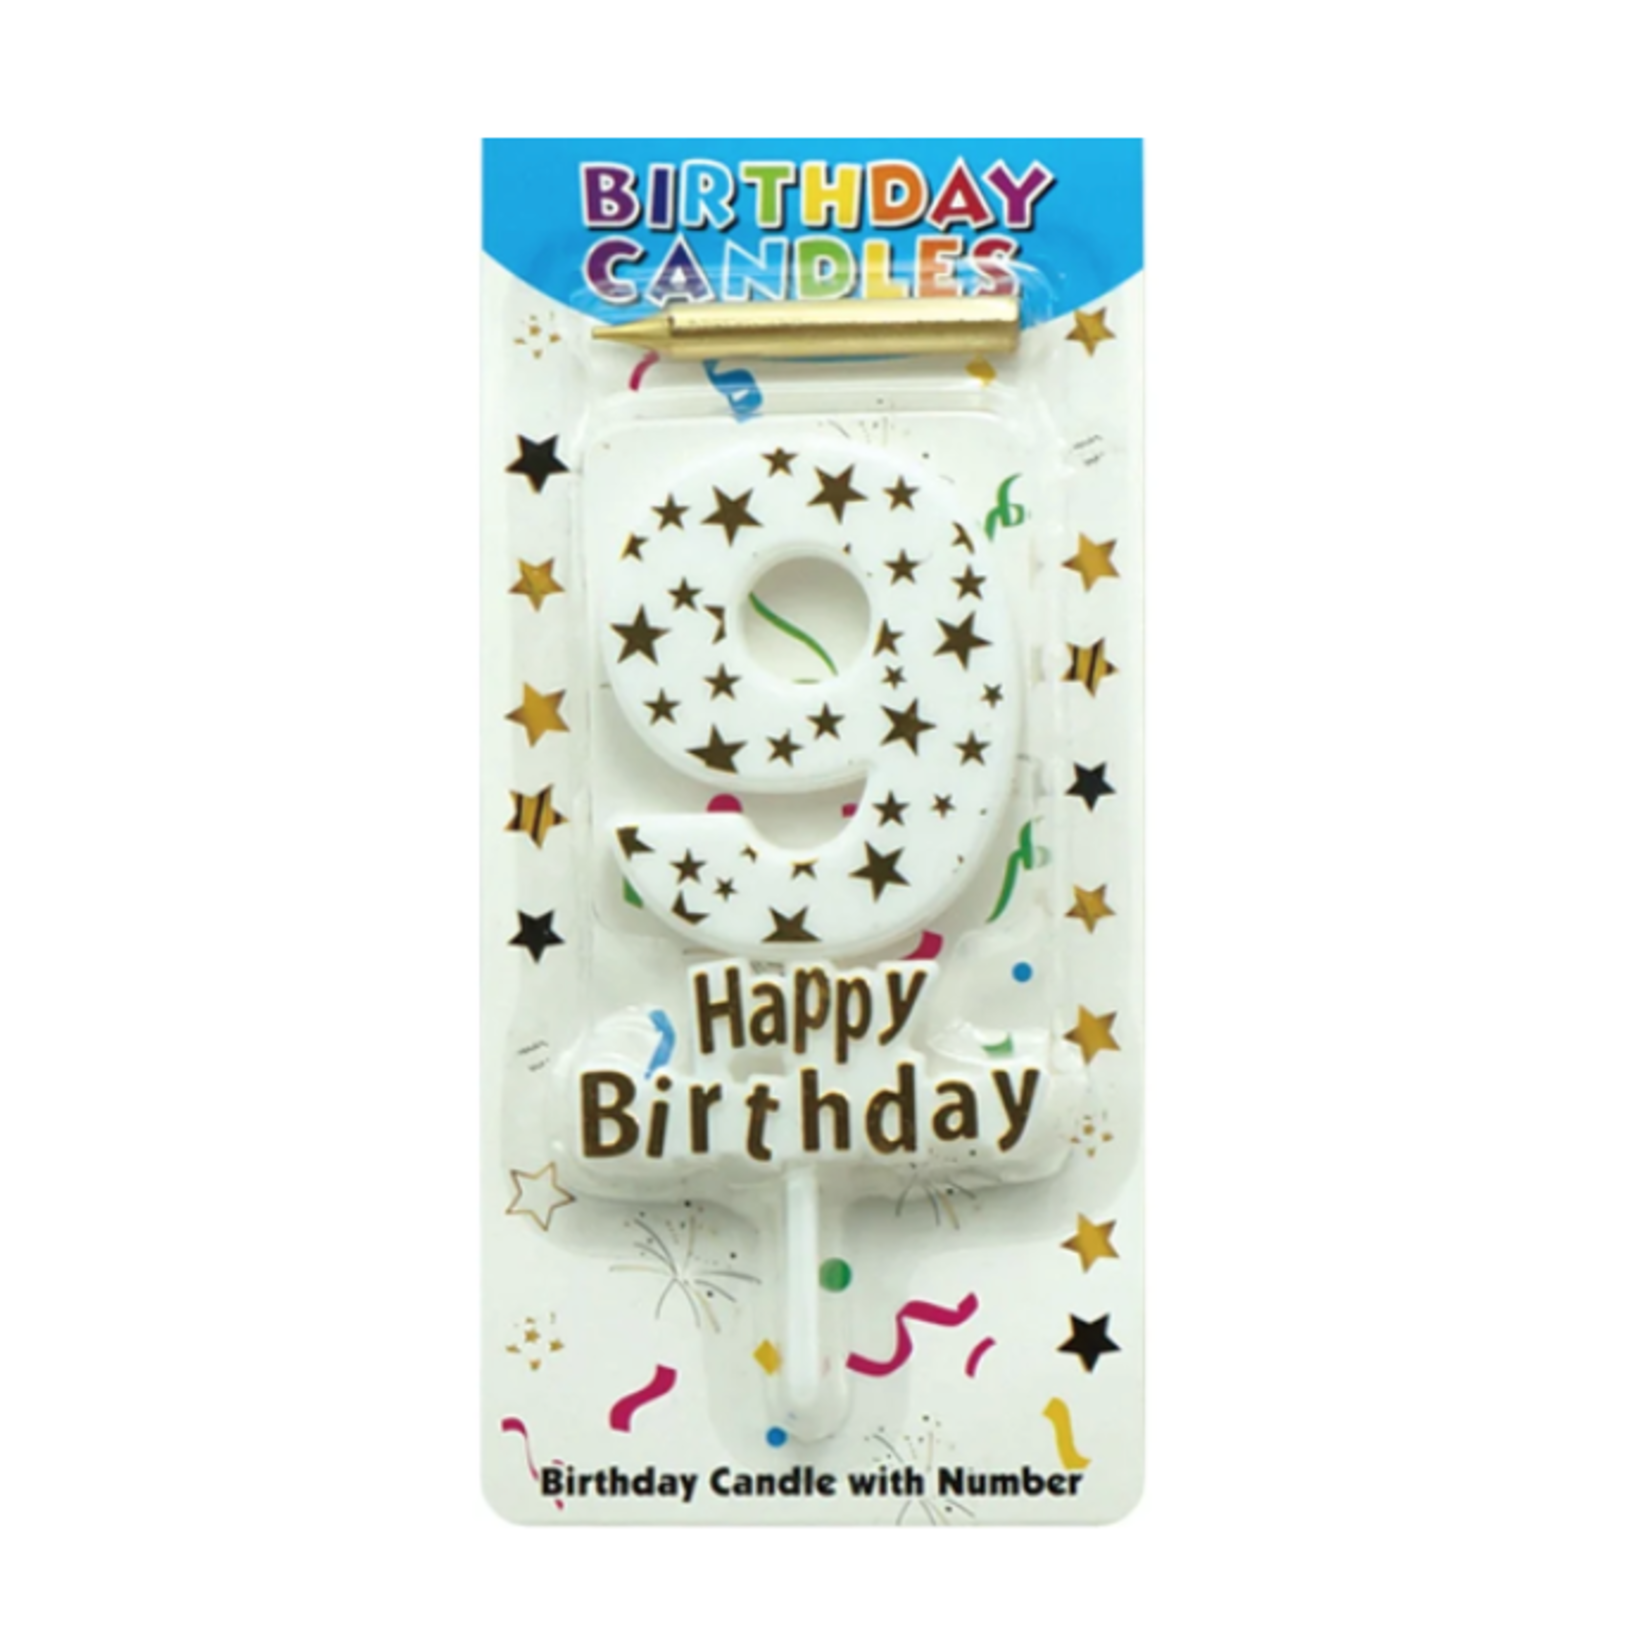 HAPPY BIRTHDAY CANDLE #9 WHITE WITH GOLD STARS